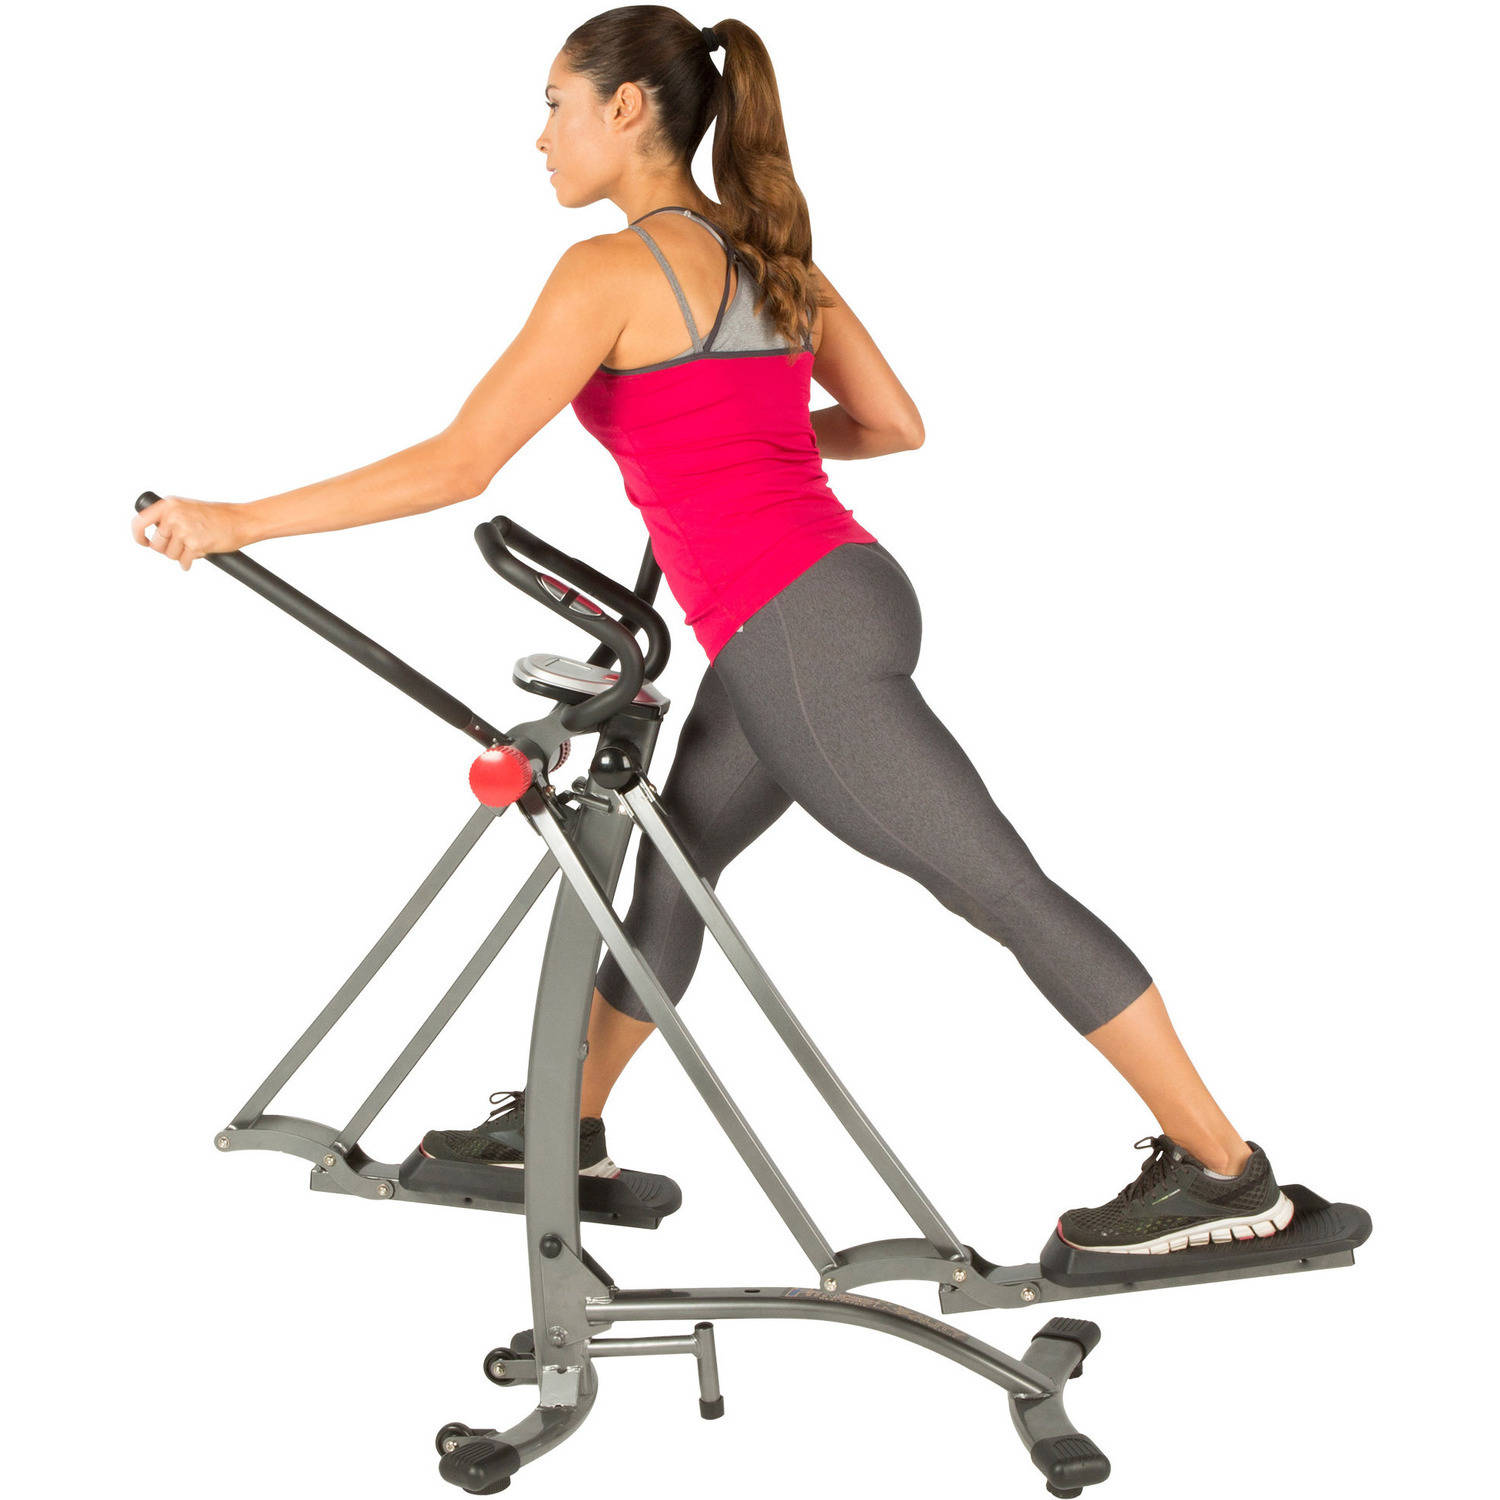 Fitness Reality Multi-Direction Elliptical Cloud Walker X1 with Pulse Sensors - image 1 of 31